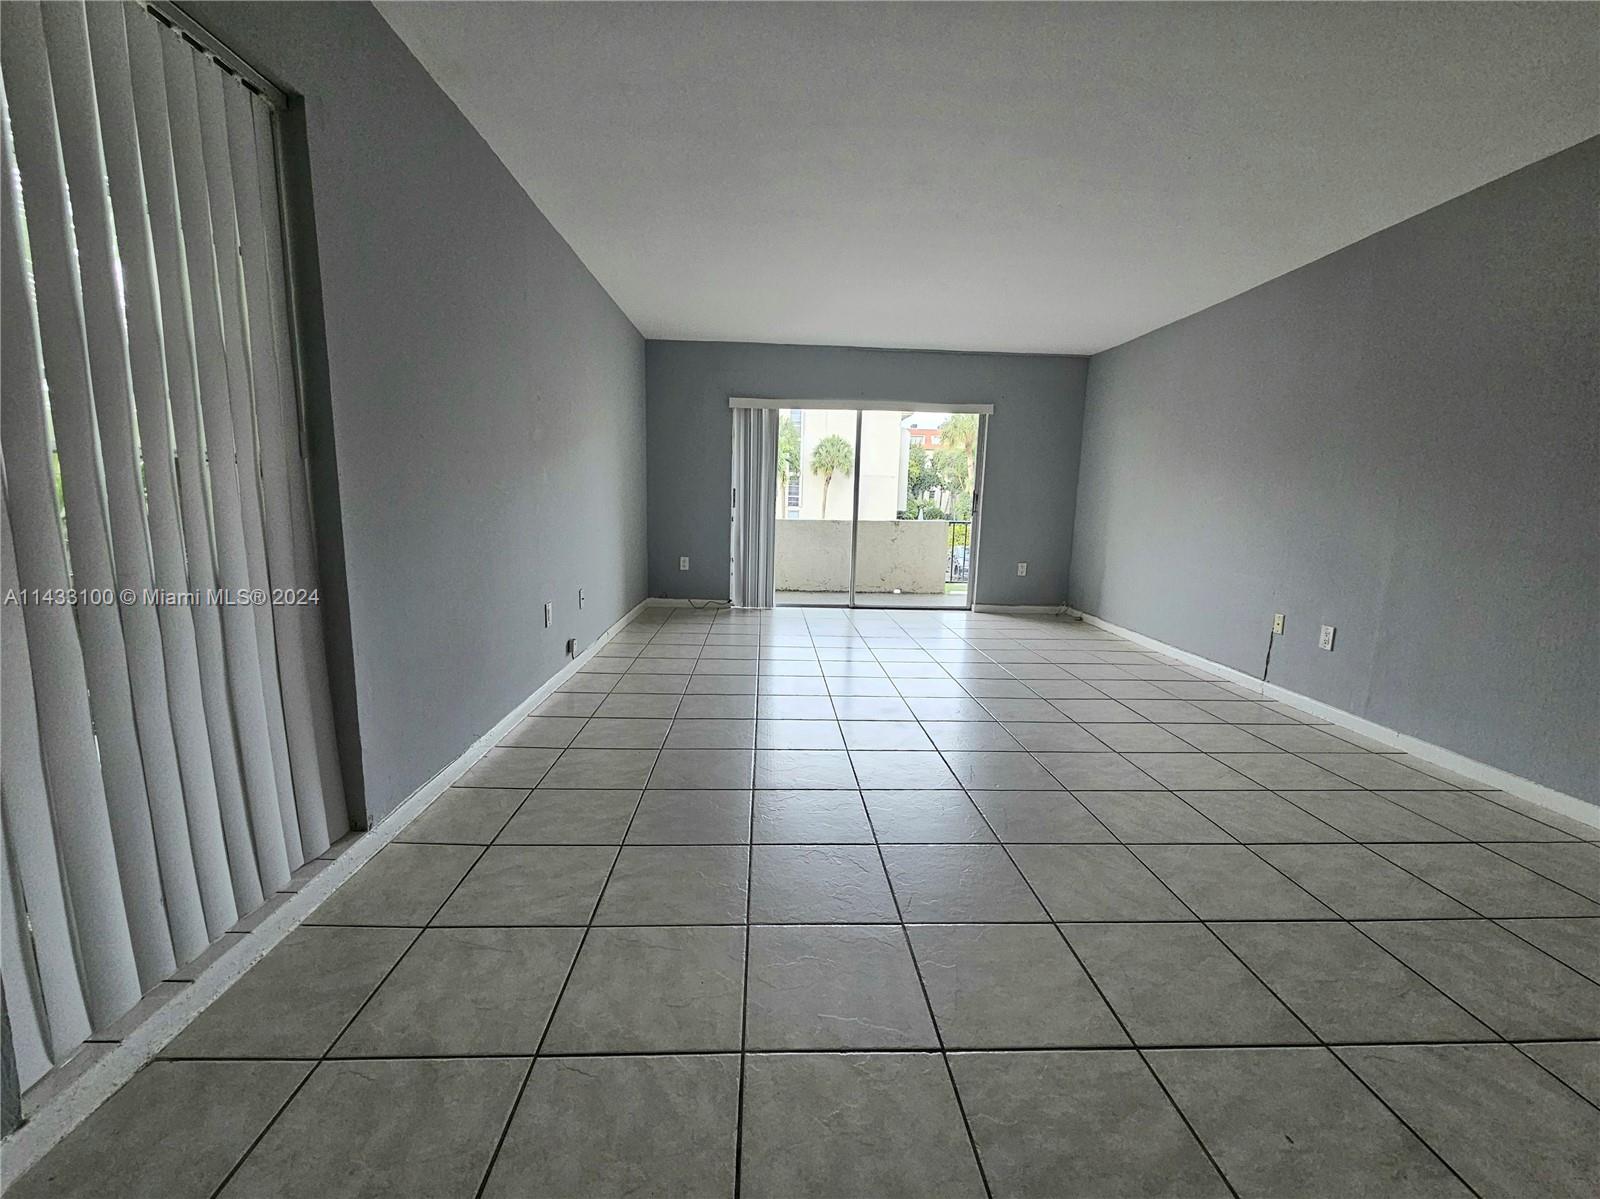 Most convenience and desired location, close to highway, walking distance to Metro rail and Dadeland Mall, restaurants and convenience store just cross the street. This well marinated 2 bedrooms, 1 and half bathroom condo locate in a quiet and gated community, Many amendments, like club house, tennis courts, swimming pools with picnic area, Jacuzzi etc. Management office on site, parking permit required, visitor parking and street parking available, good school district, washers and dryers every floor.